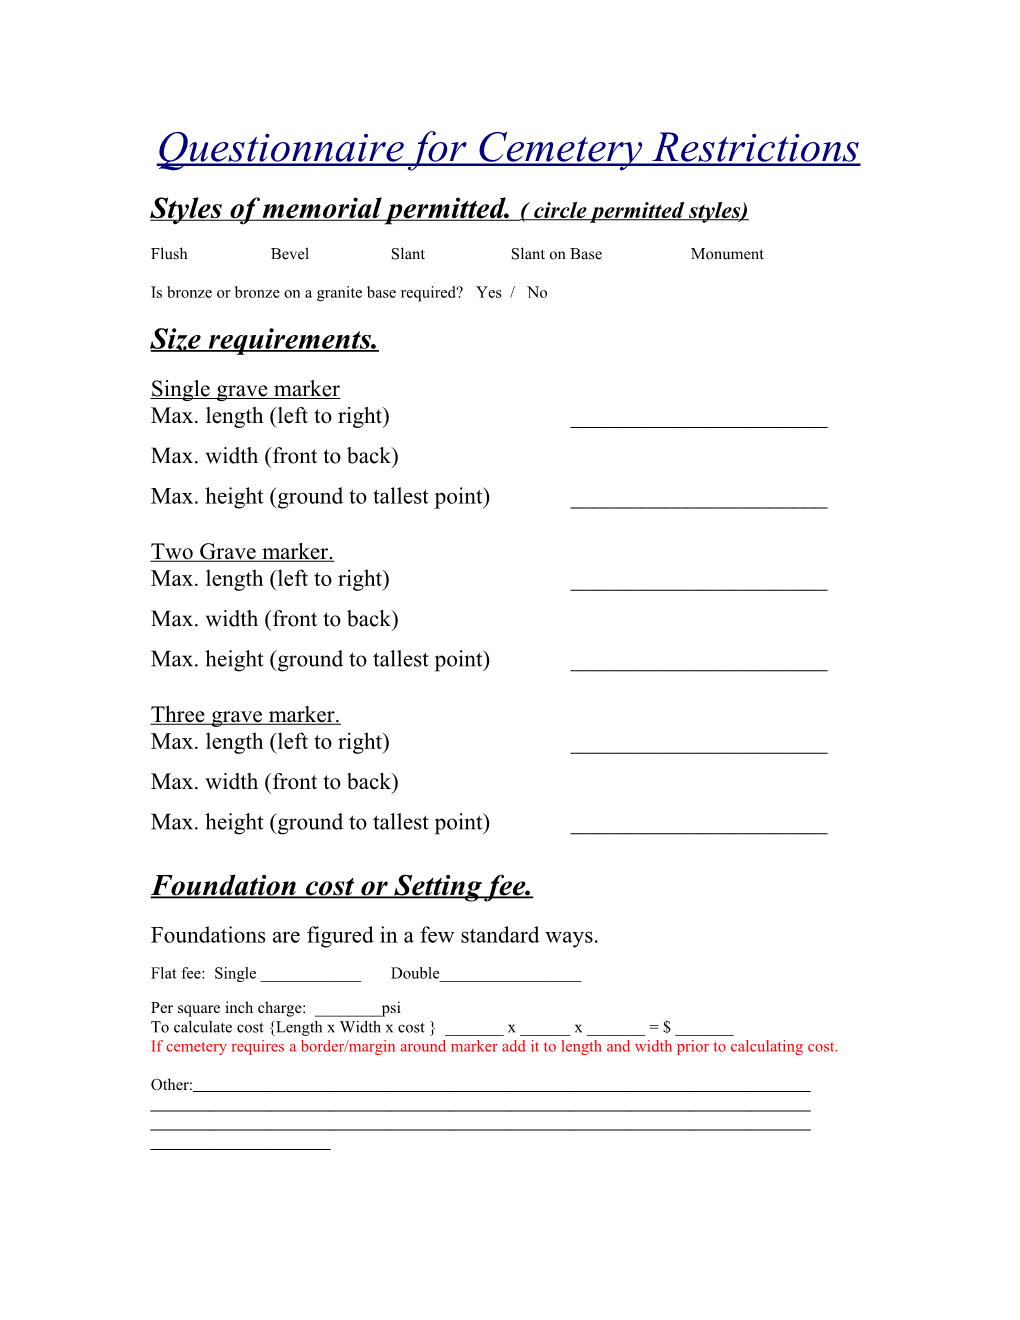 Questionnaire for Determining Marker Or Monument Restrictions